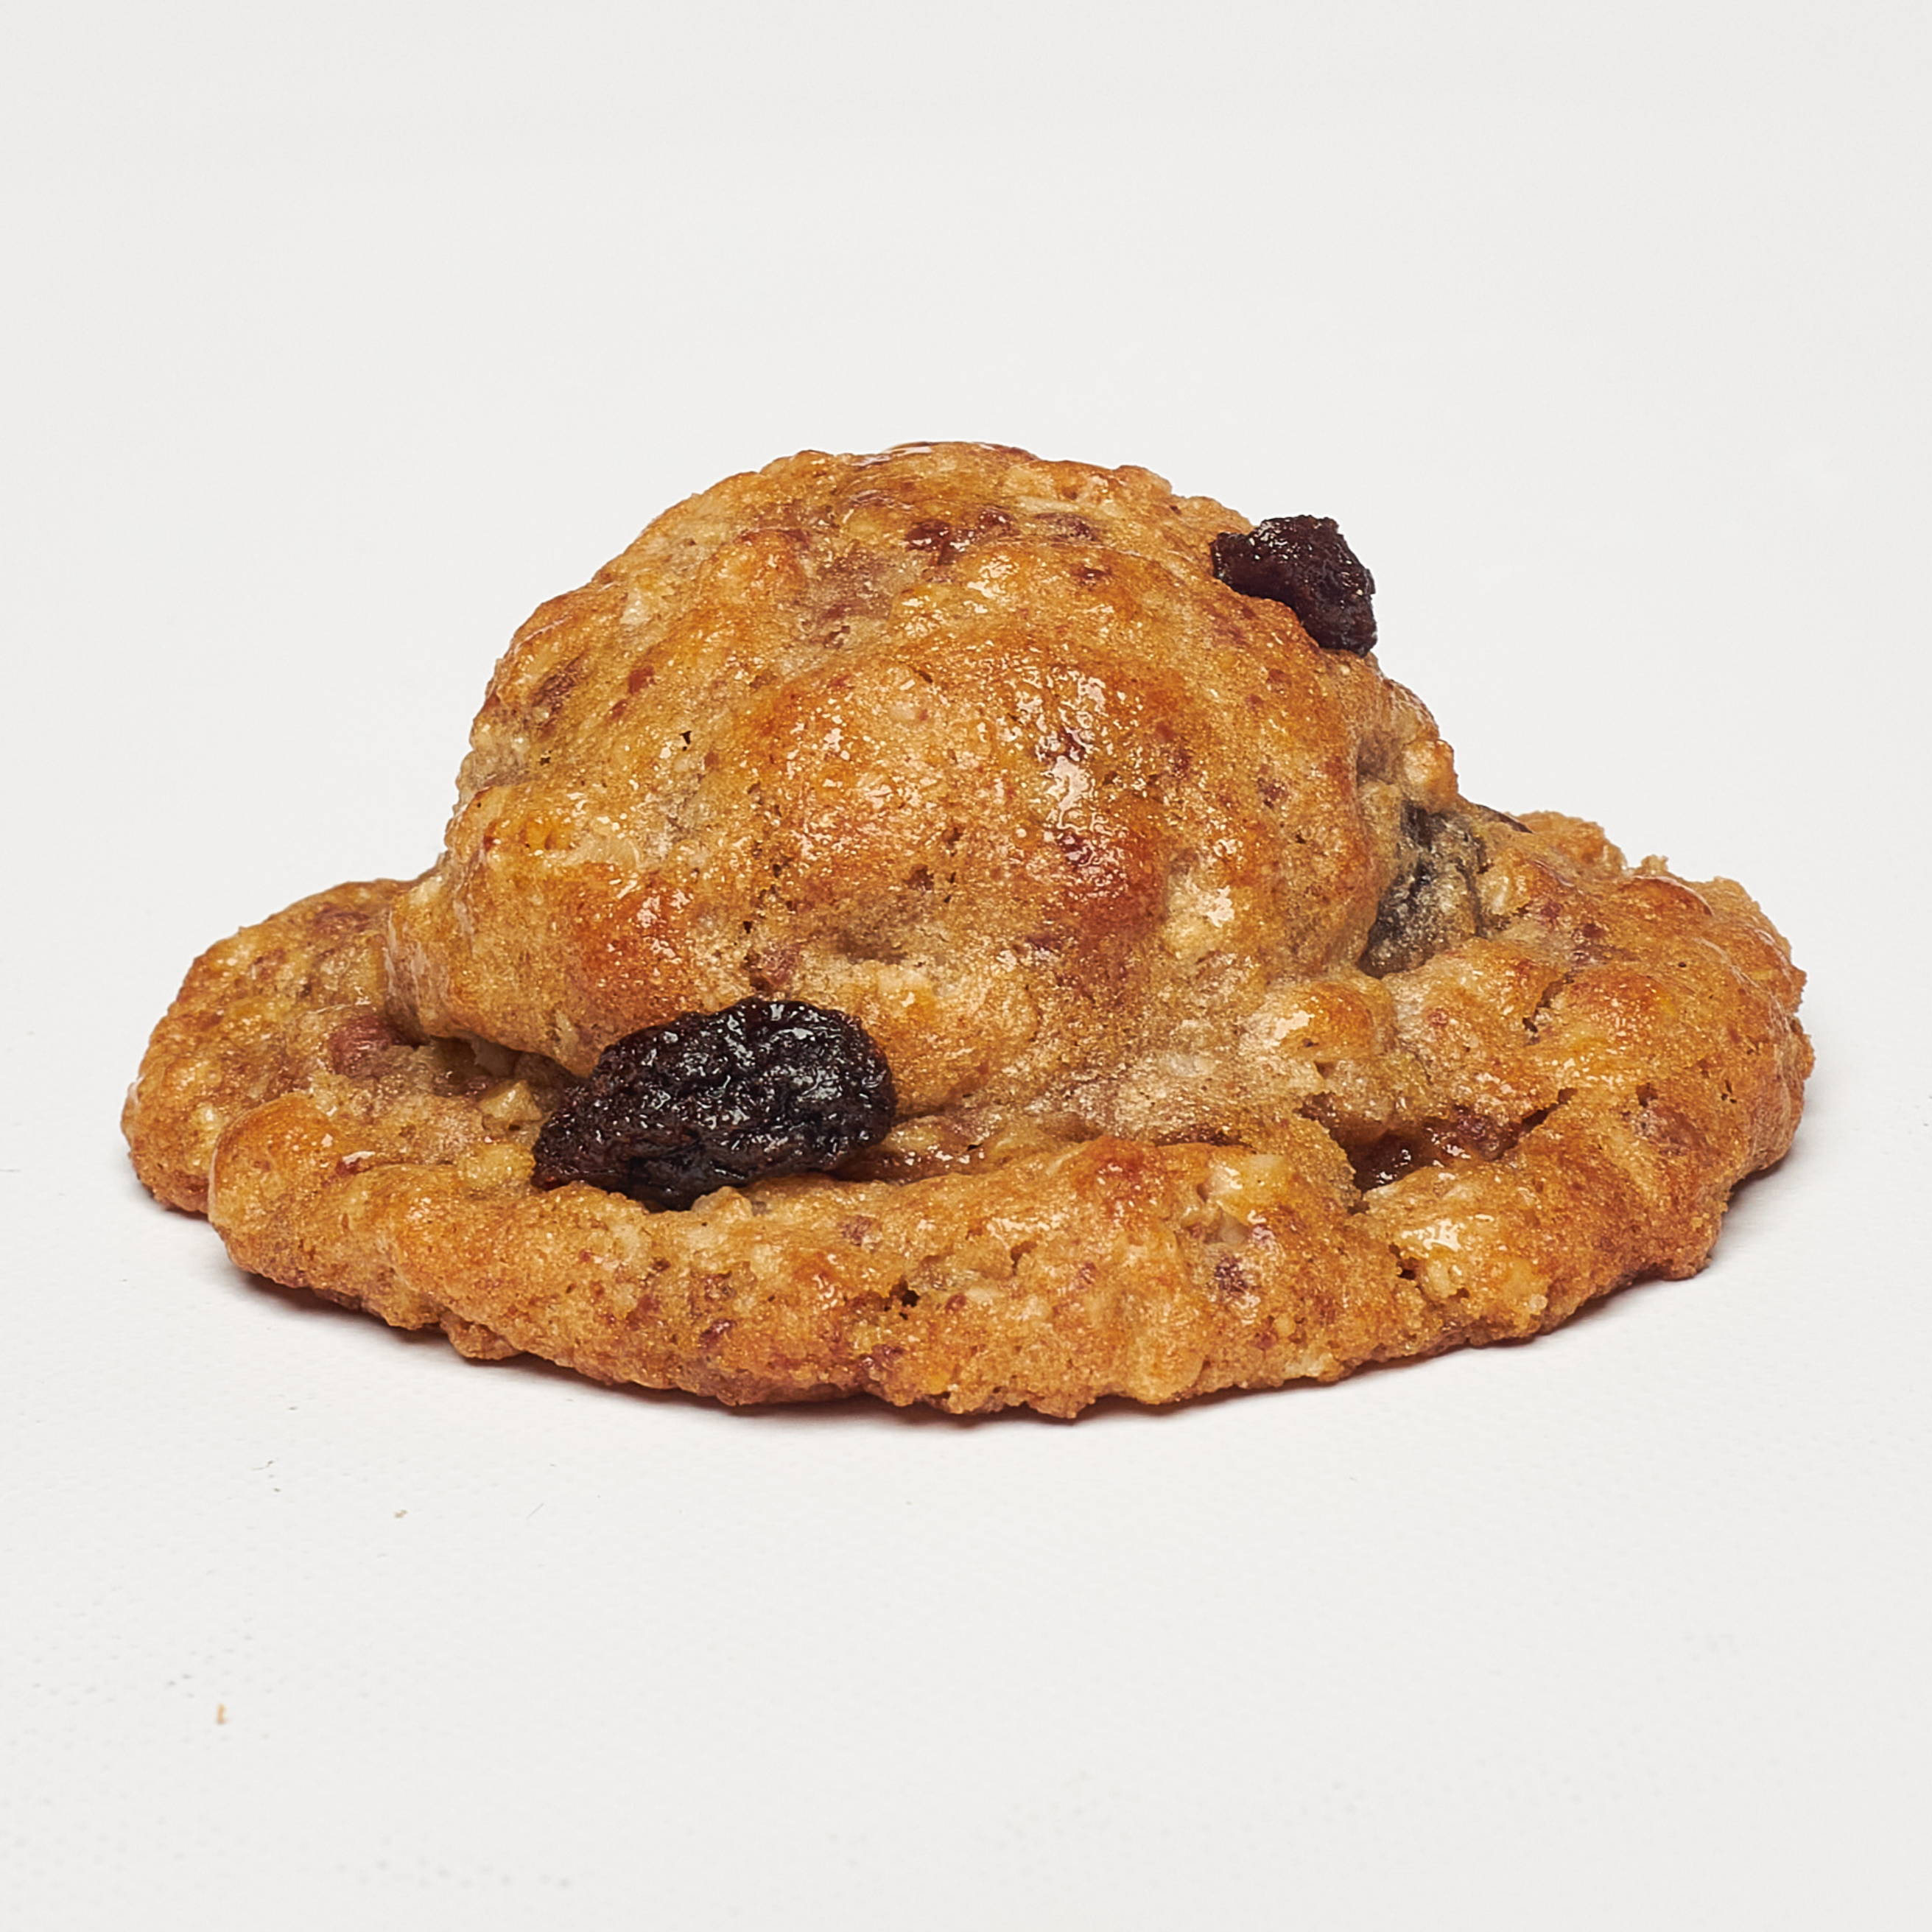 Raisin Cane Oatmeal Raisin Cookie at Moonshine Mountain Cookie Company in Knoxville, TN